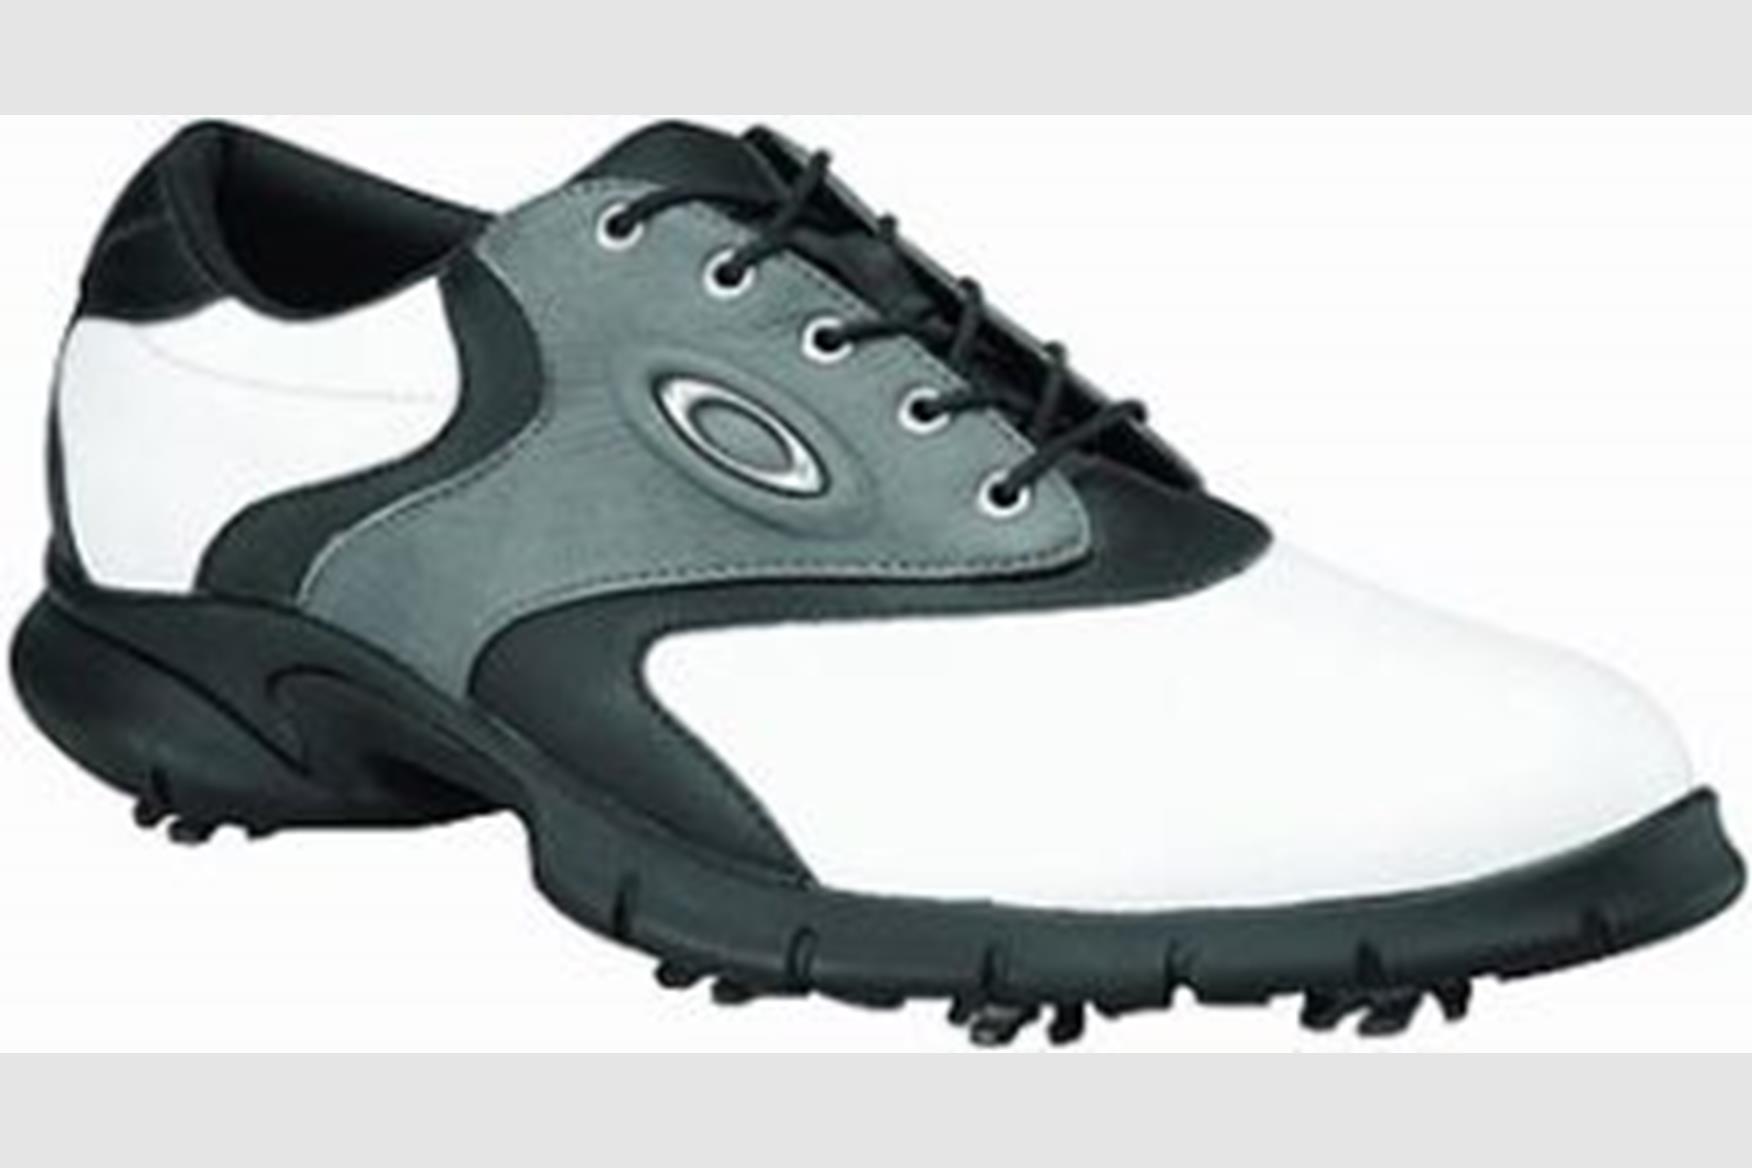 Oakley Overdraw Golf Shoes Review Equipment Reviews